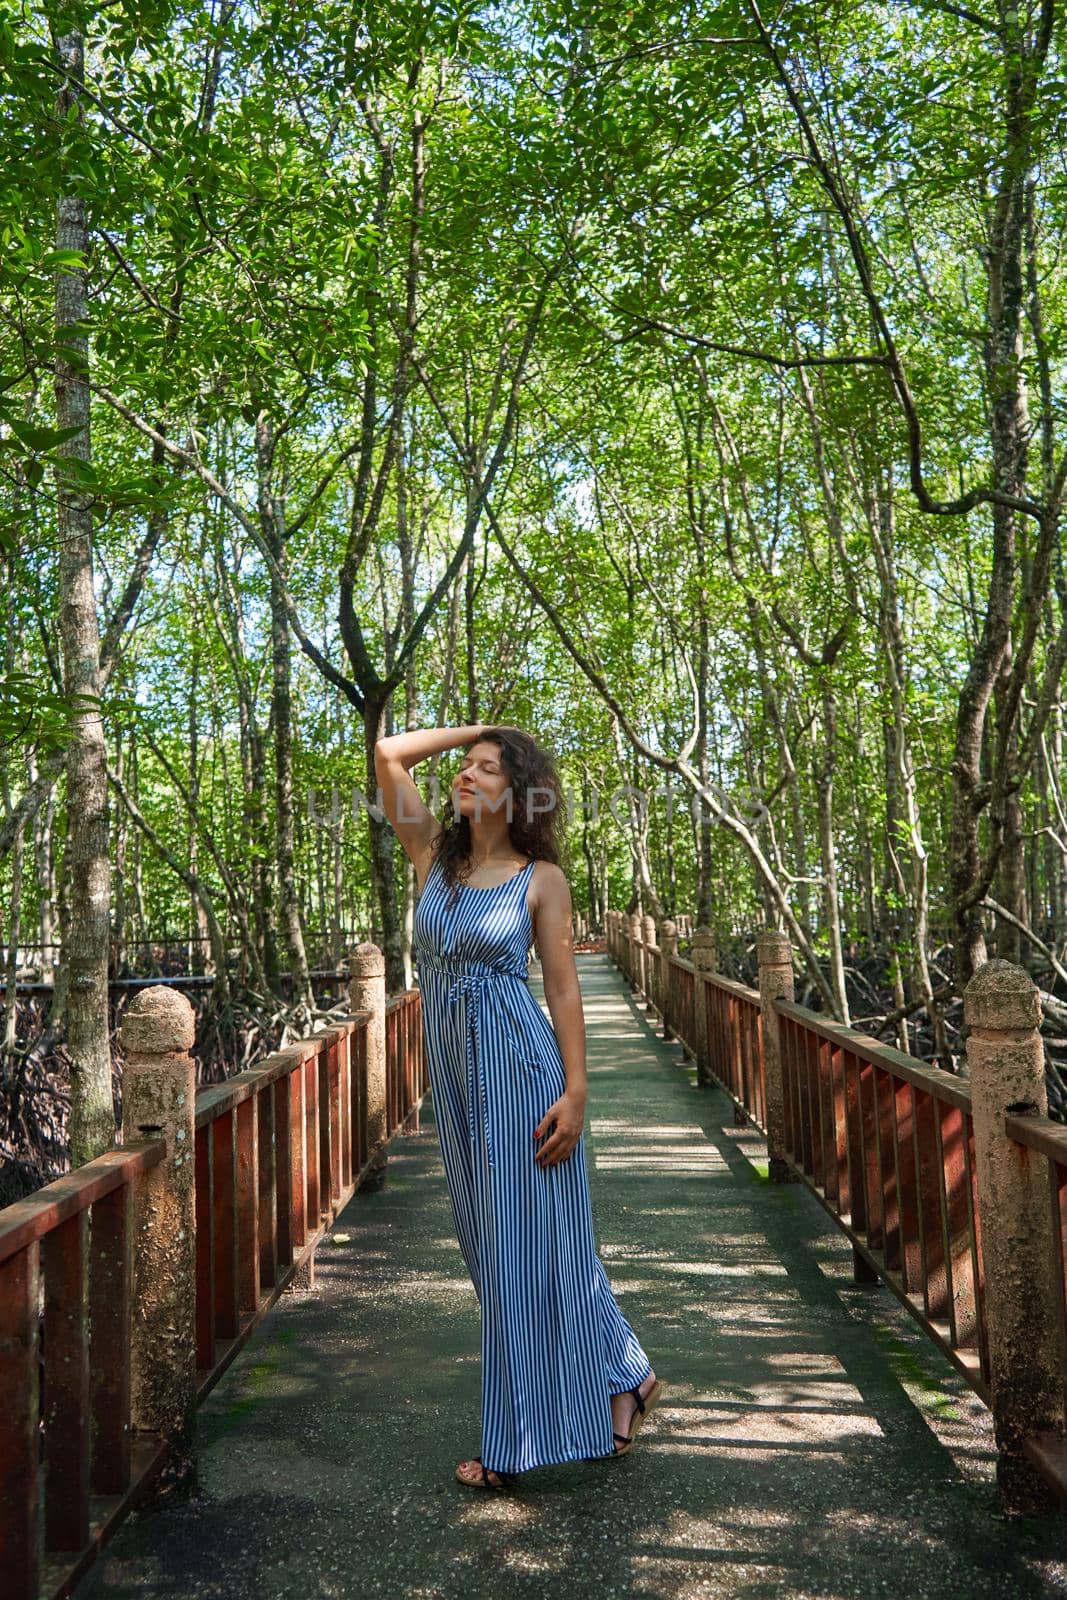 Beautiful girl walking through the mangrove forest in Asia.